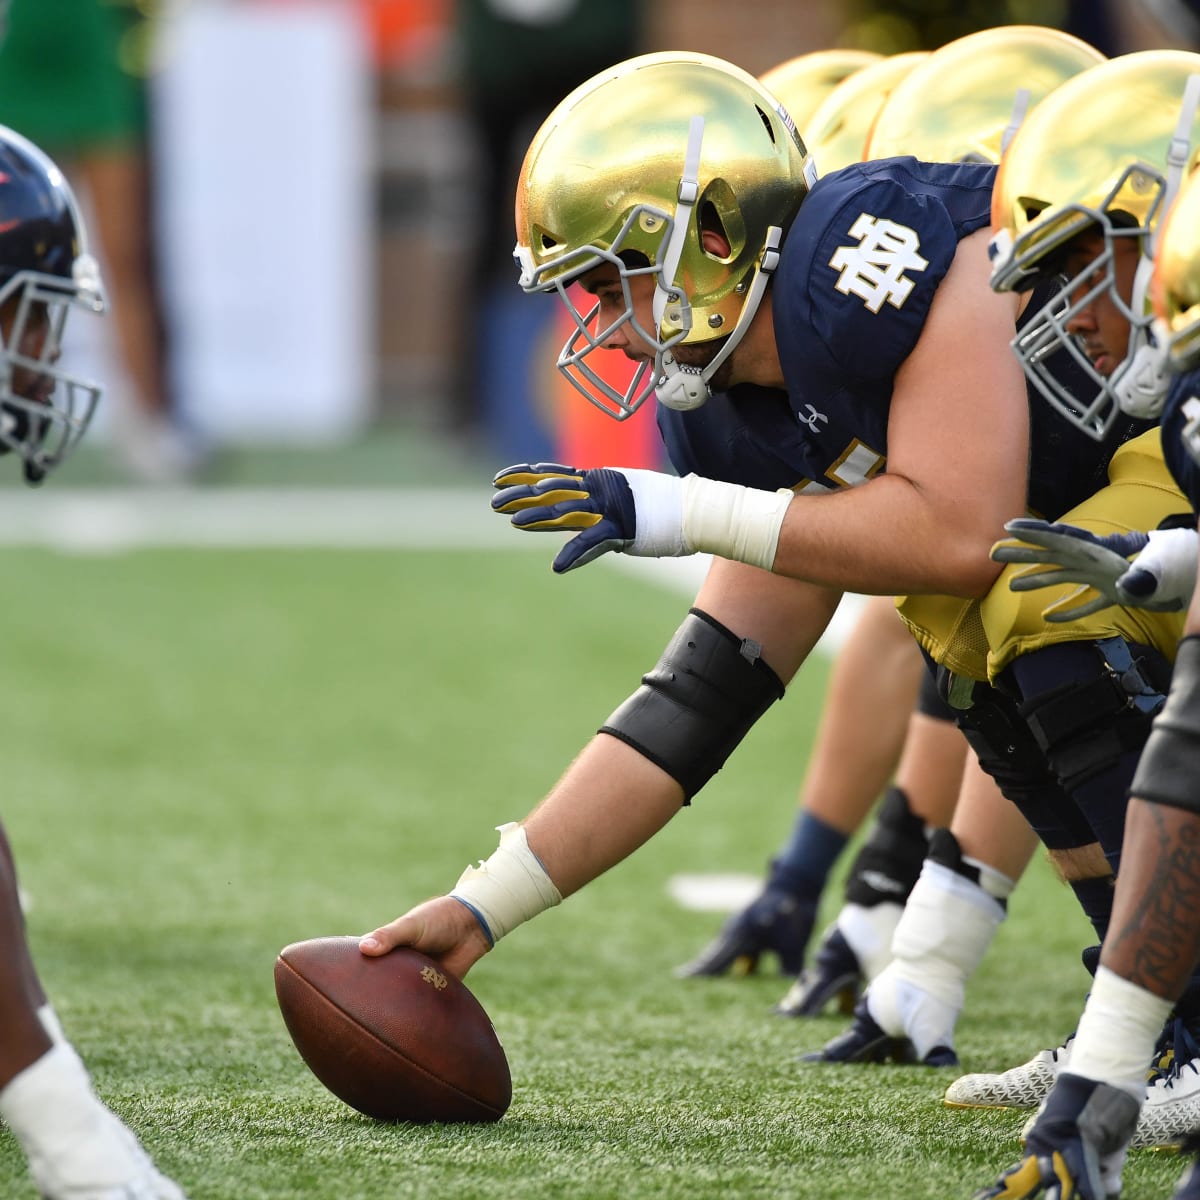 Podcast What Could Keep Notre Dame From Having A Championship Offense In 2020 Sports Illustrated Notre Dame Fighting Irish News Analysis And More